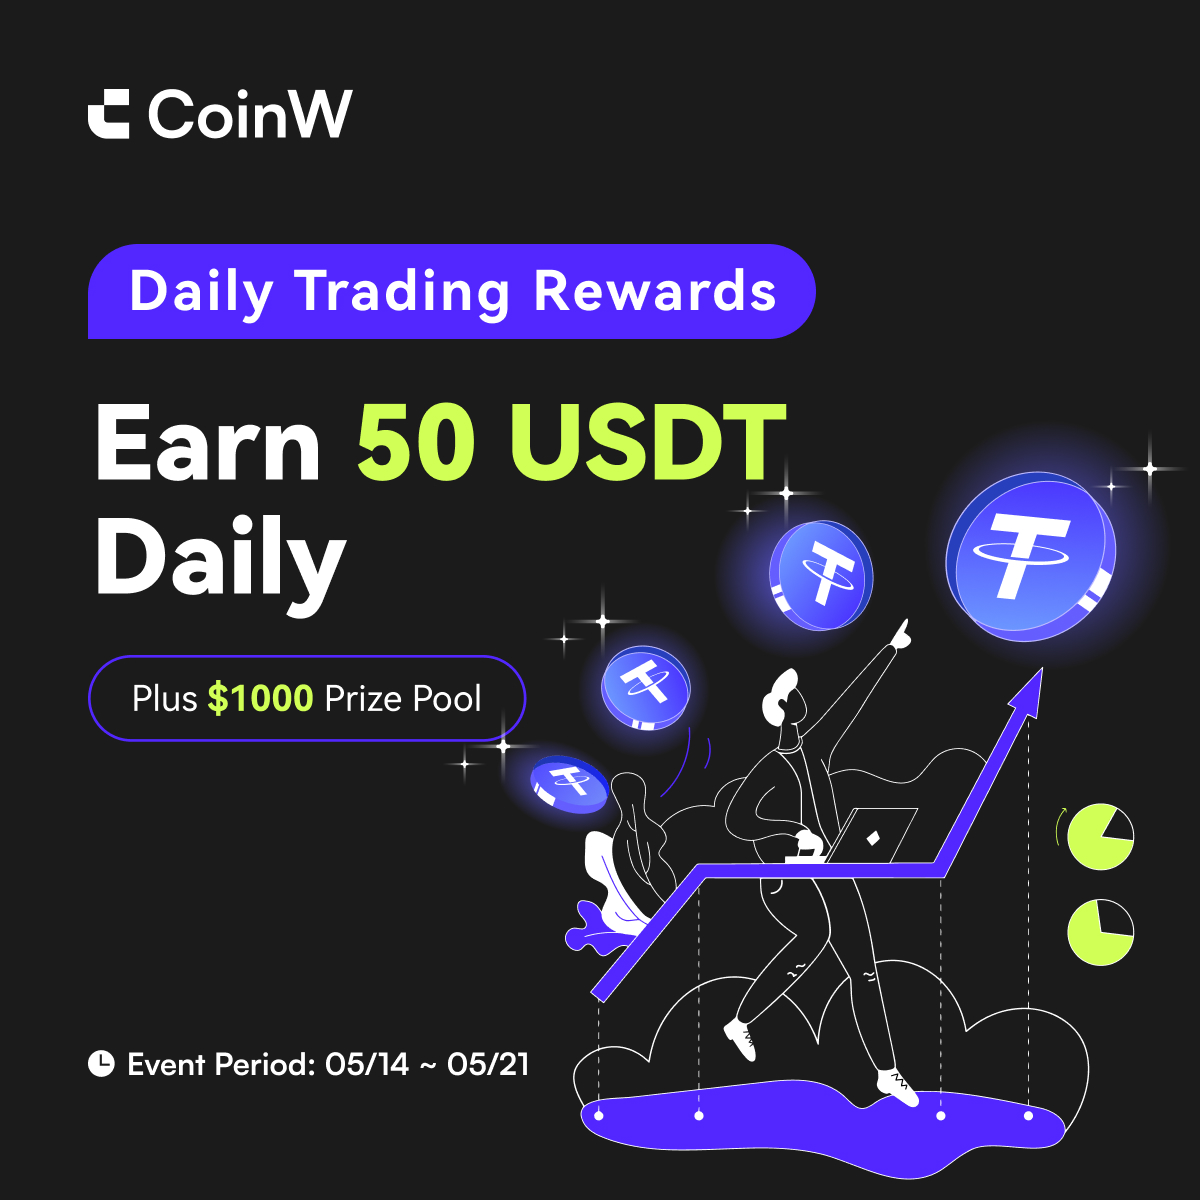 Get ready for the ultimate trading thrill! #CoinW Daily #Trading #Rewards are here with a chance to win 50 USDT daily + a $1,000 prize pool. 📅 May 14–21, 4 PM UTC Learn more: coinw.zendesk.com/hc/en-us/artic…